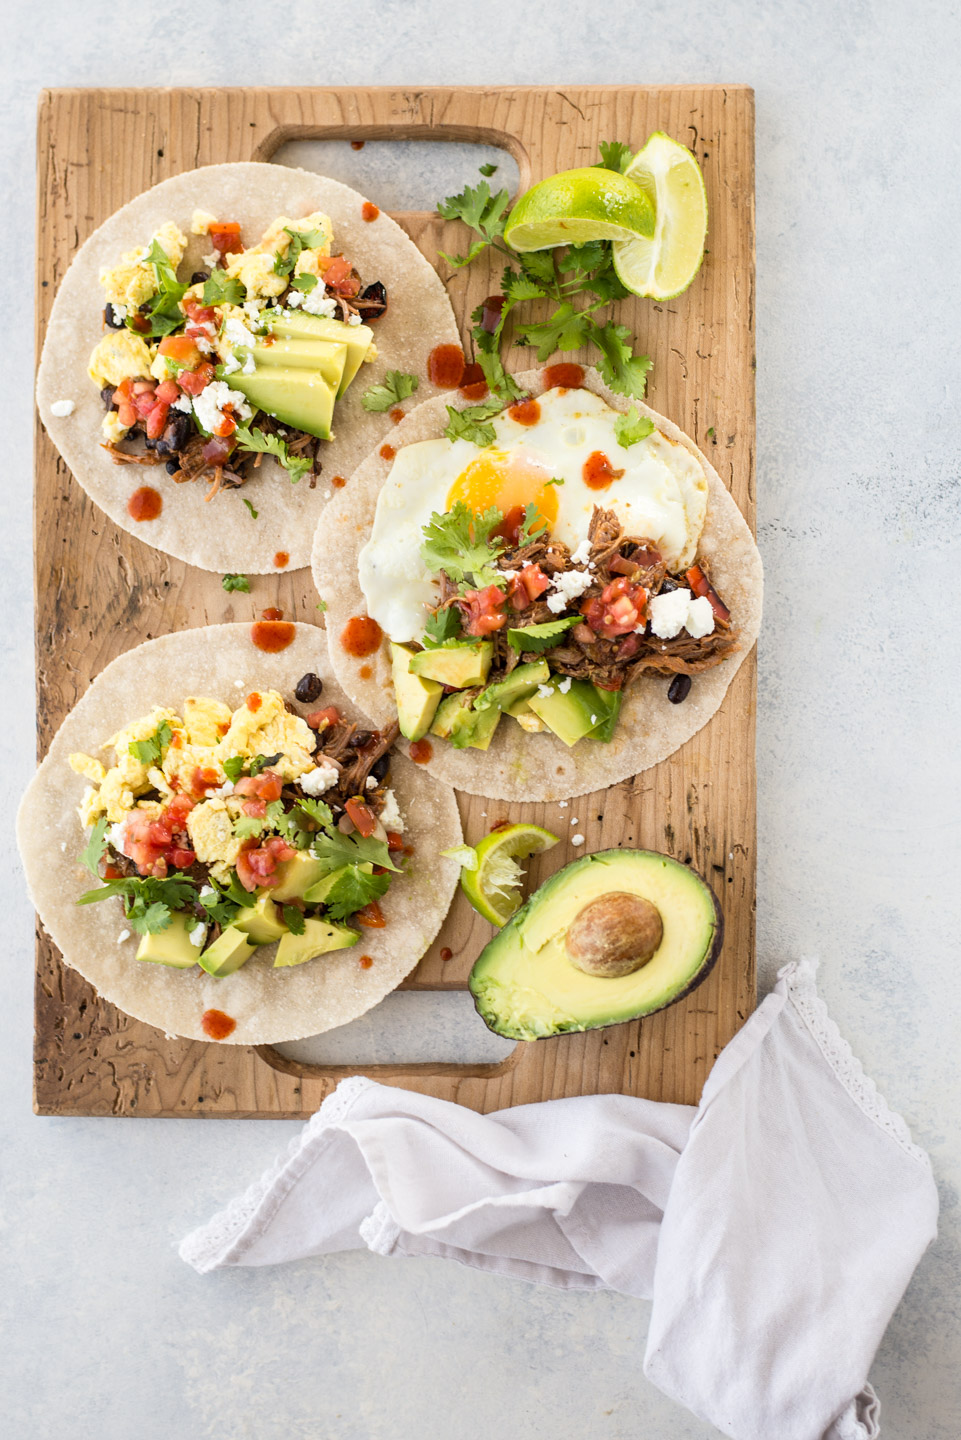 Looking for a quick breakfast you can eat on the go? Check out these make-ahead breakfast tacos.